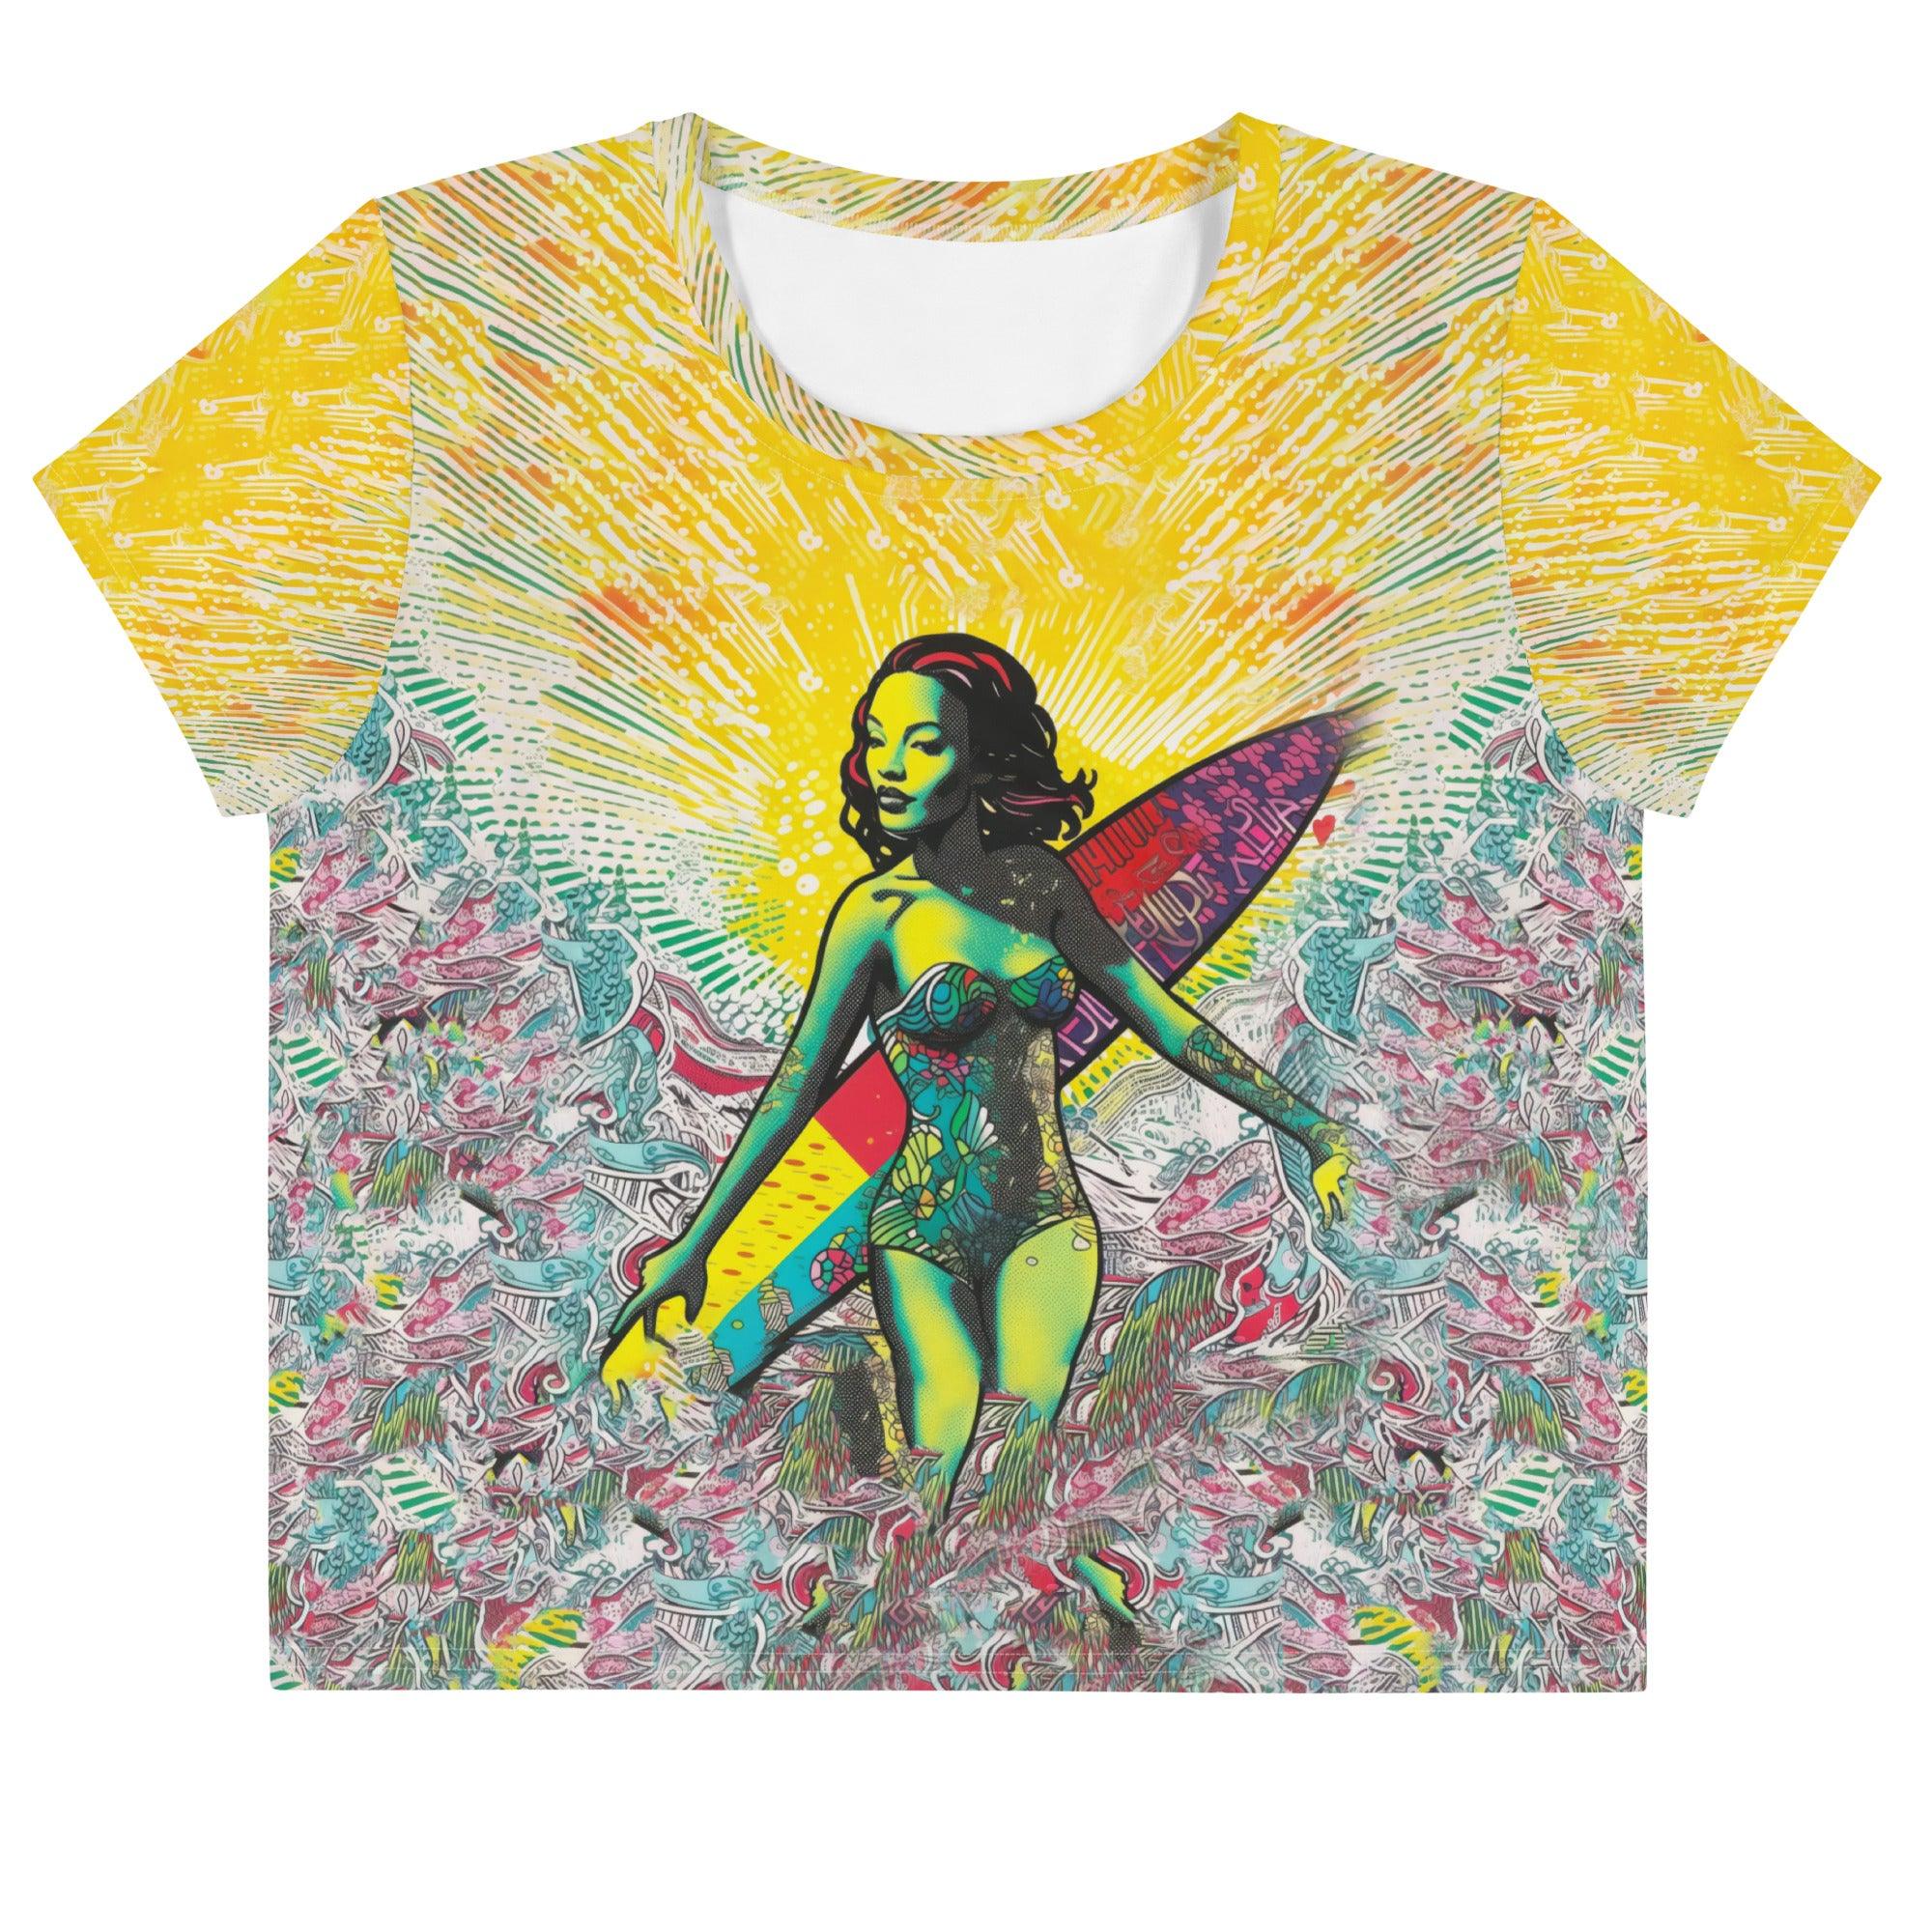 Surfing 1 52 All-Over Print Crop Tee - Beyond T-shirts